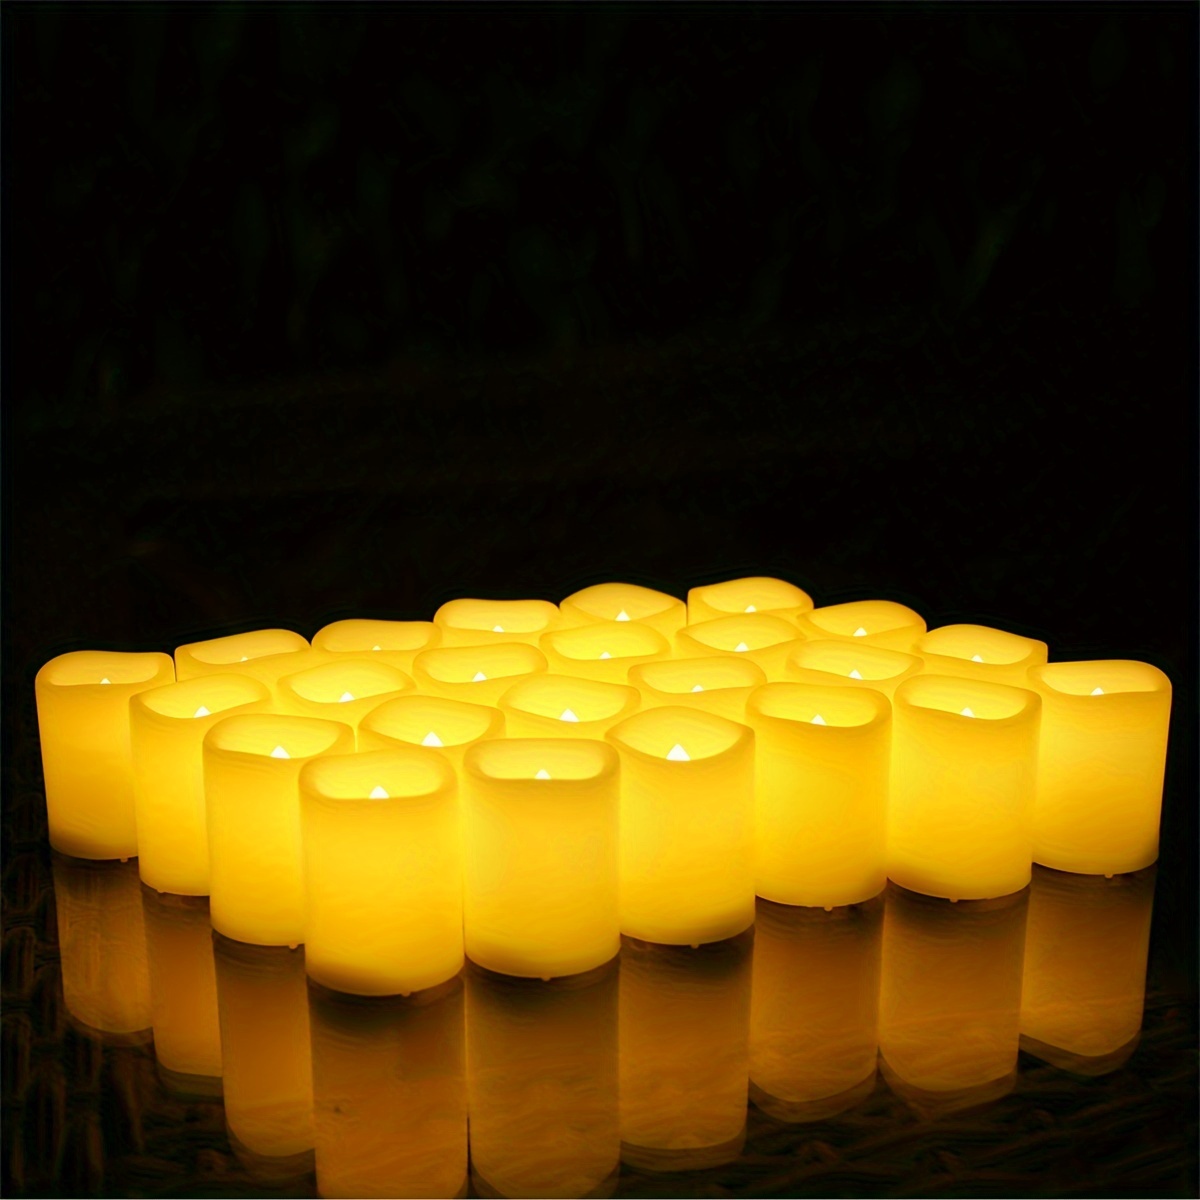 

24 Pack Battery Operated Flameless Votive Candles Led Electric Tea Lights With White Body And Amber Glow For Home Kitchen Wedding Party Festival Tabletop Decorations, Size D 1.5 Inch X H 2 Inch